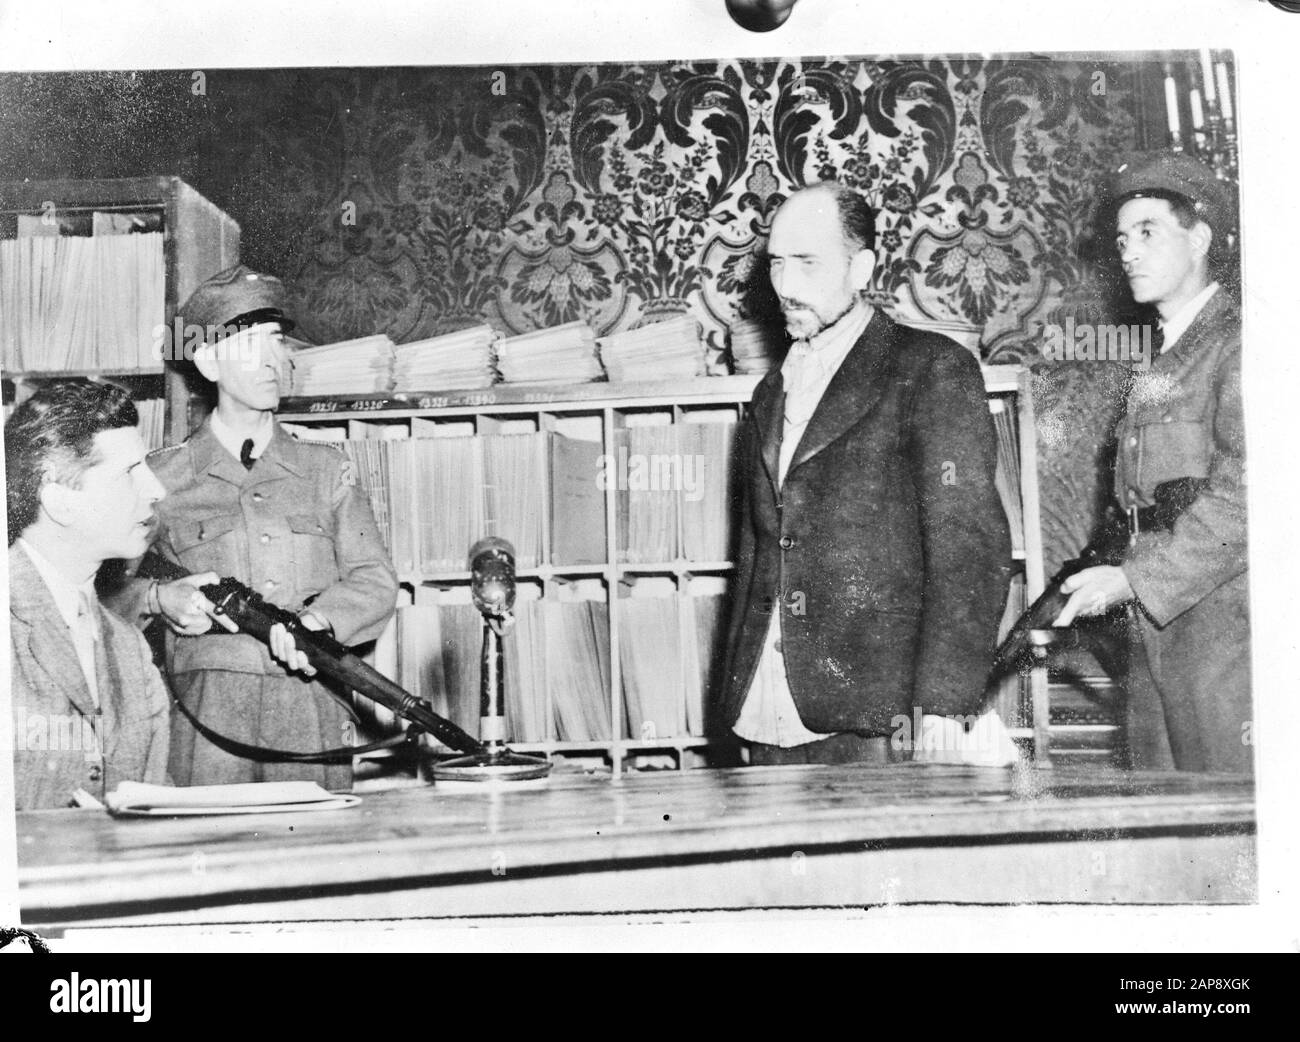 The executioner of Auschwitz [Maximilian Grabner (standing) leader of the Political Department of Concentration Camp Auschwitz is questioned by Dr Heinrich Dumayer, head of the Viennese police and former interned of Auschwitz] Annotation: Repronegative. The interrogation took place in early September 1945. The repro is dated 28-12-1945. This photograph was published in two newspapers on 3 and 5 January 1946. Grabner then has a wrong first name in both captions (Wilhelm) and is mistakenly called commander of Auschwitz. Grabner was sentenced to death in December 1947 in Poland and hanged in Janu Stock Photo